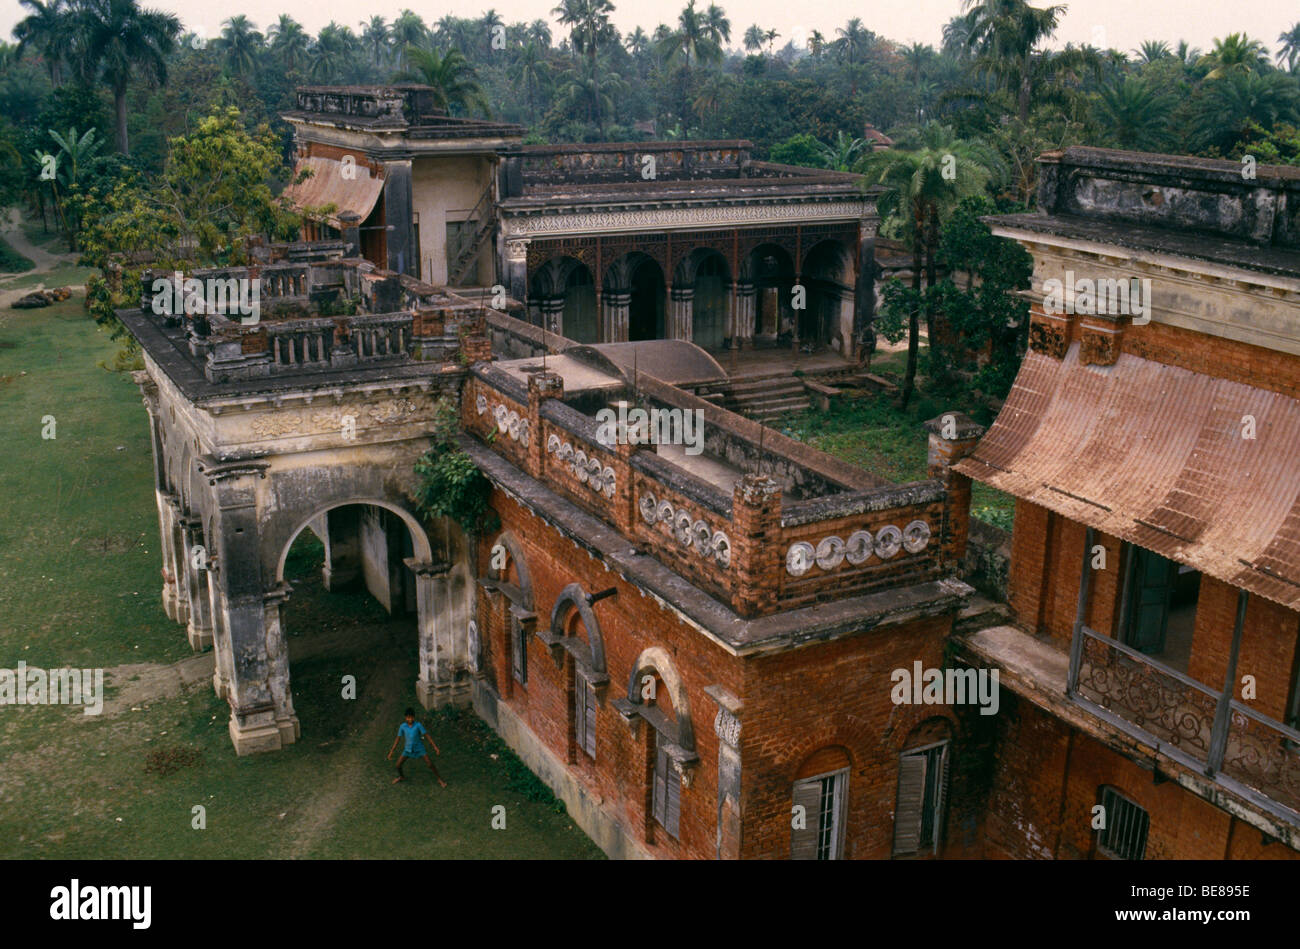 BANGLADESH Aricha Ruins of former house belonging to a Zamindar a landlord employed to collect taxes from the peasants. Stock Photo